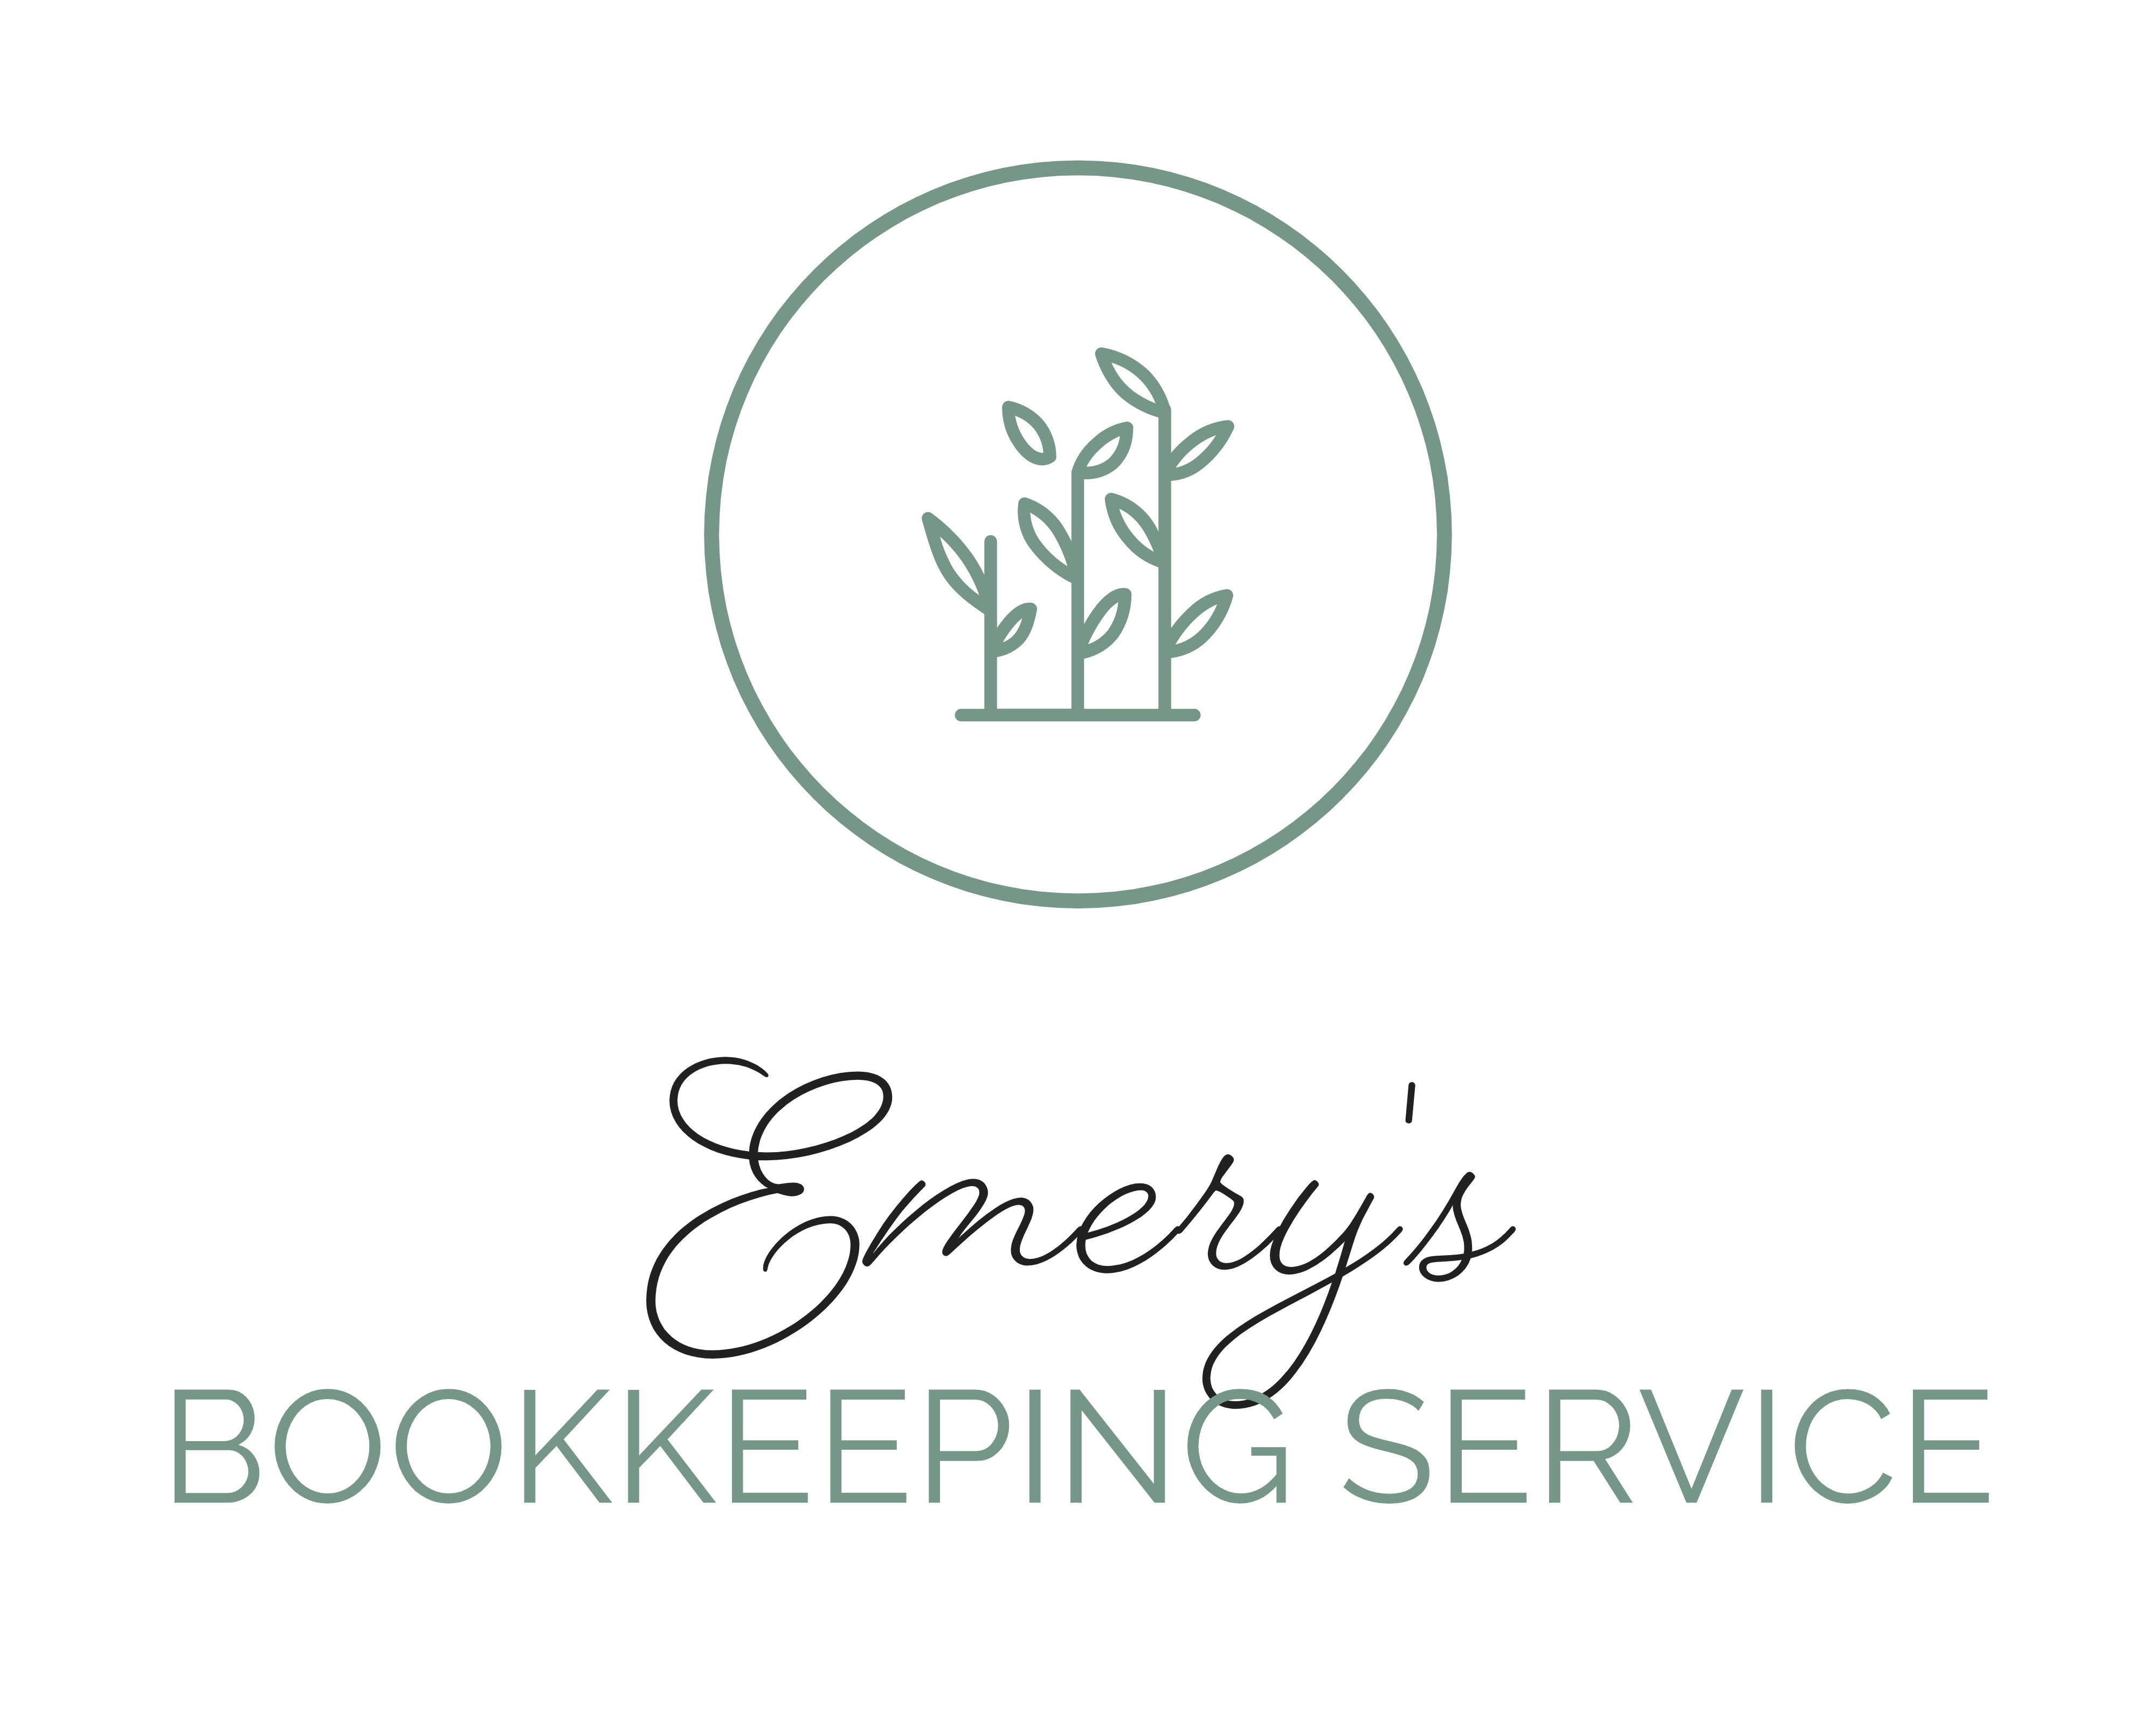 Emery's Bookkeeping Service